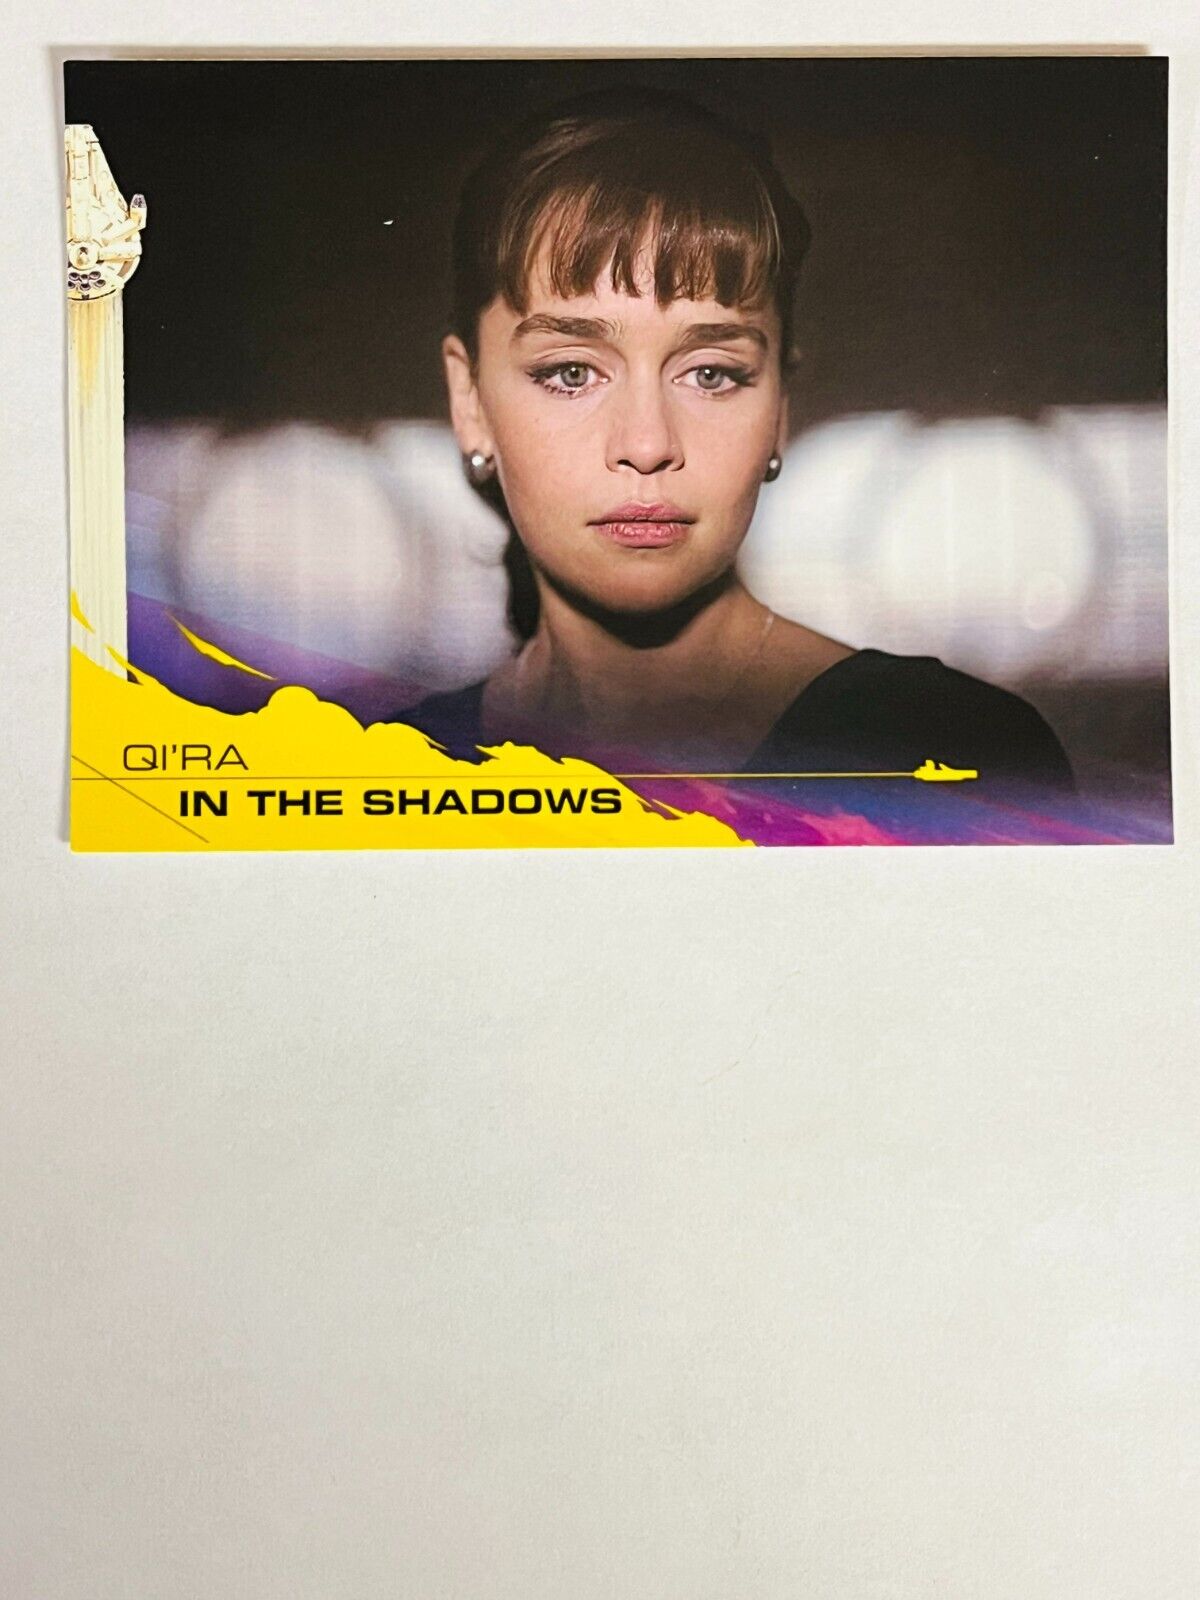 2018 Topps Solo A Star Wars Story Base Card #64  Qi’ra in the Shadows